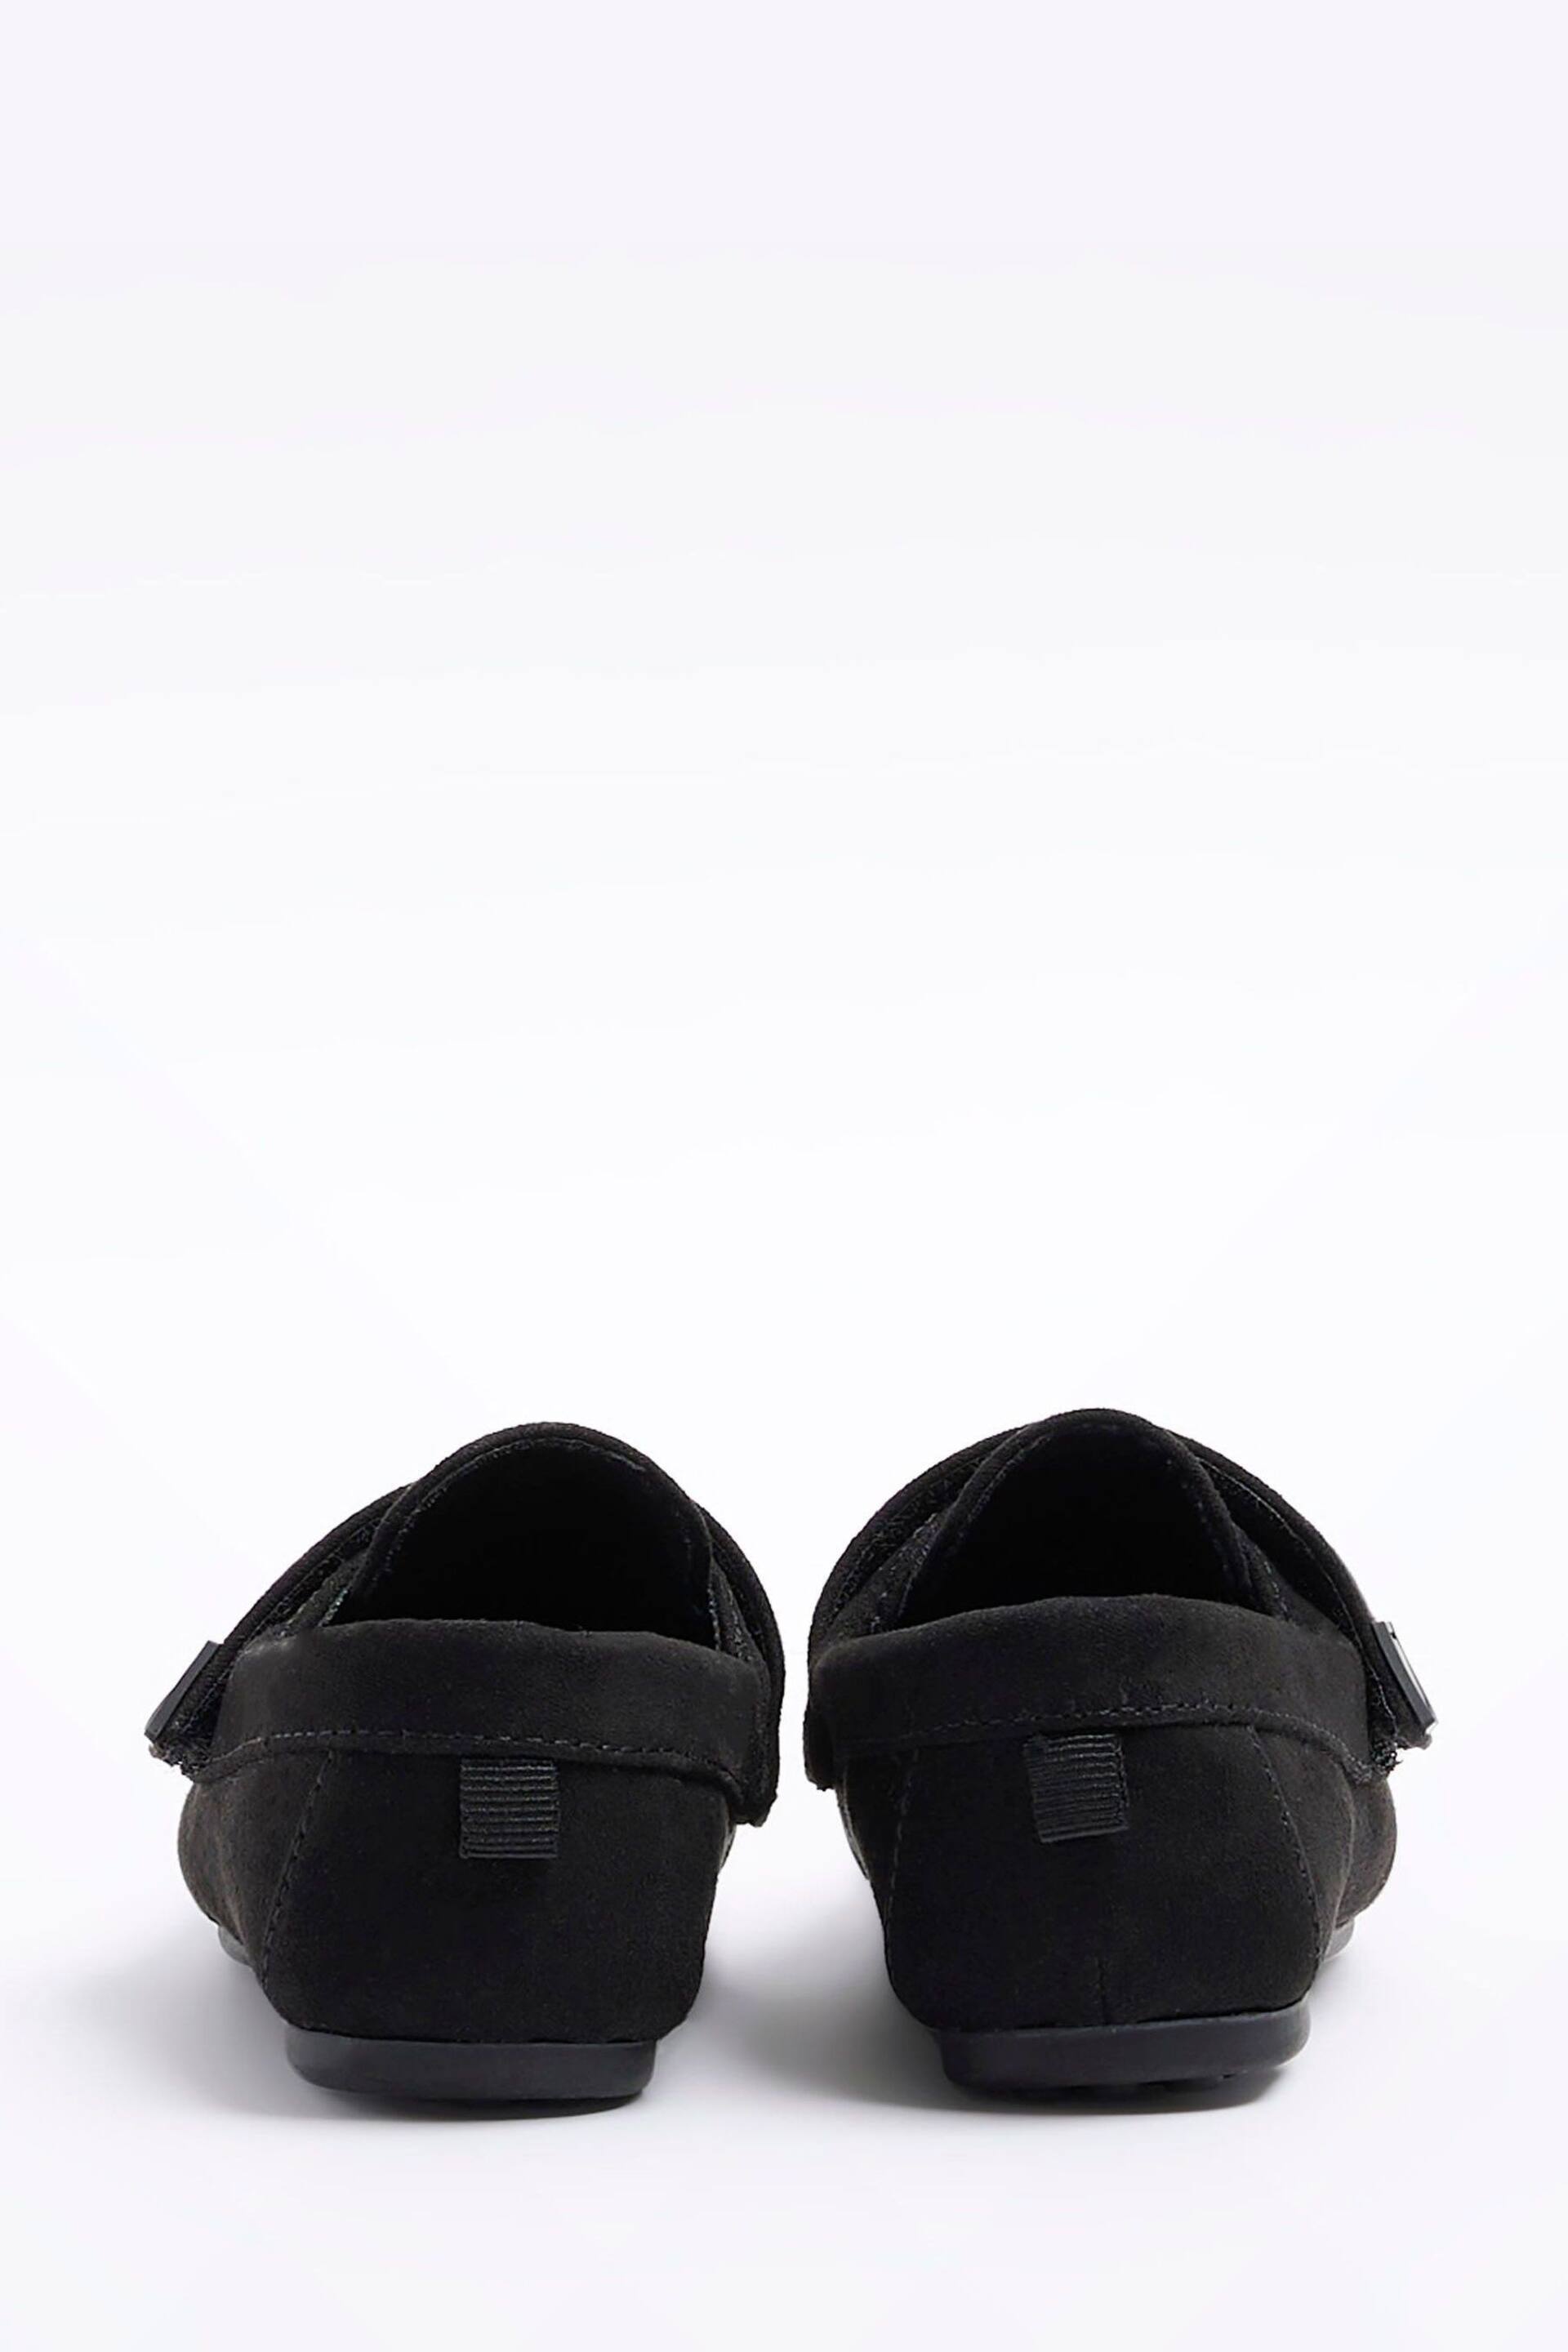 River Island Black Boys Velcro Loafers - Image 2 of 4